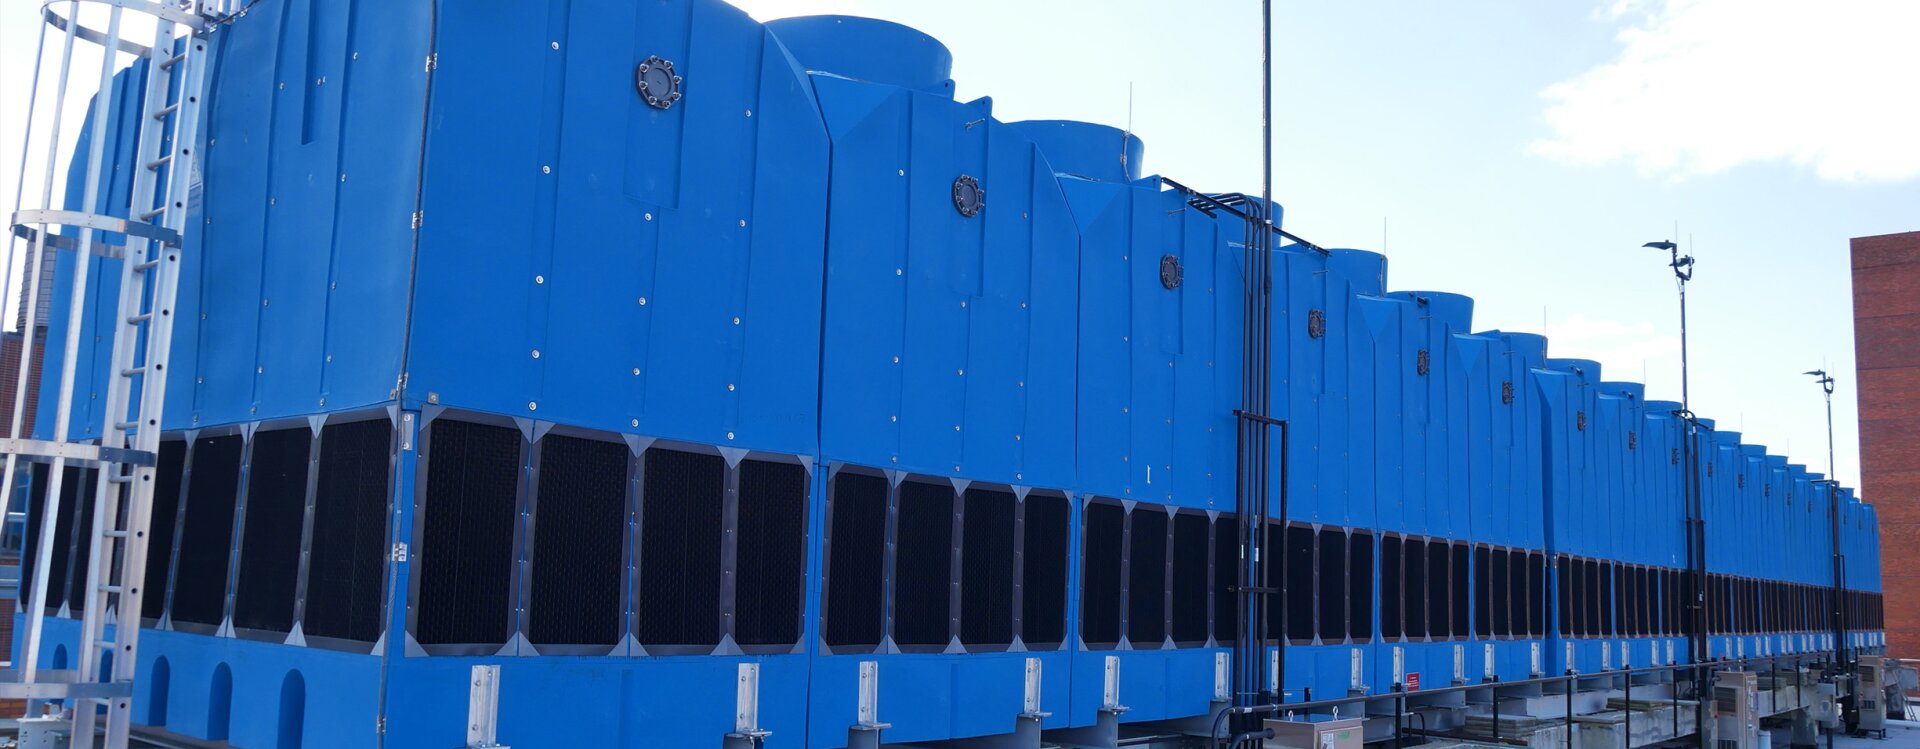 Anti-Microbial water cooling towers